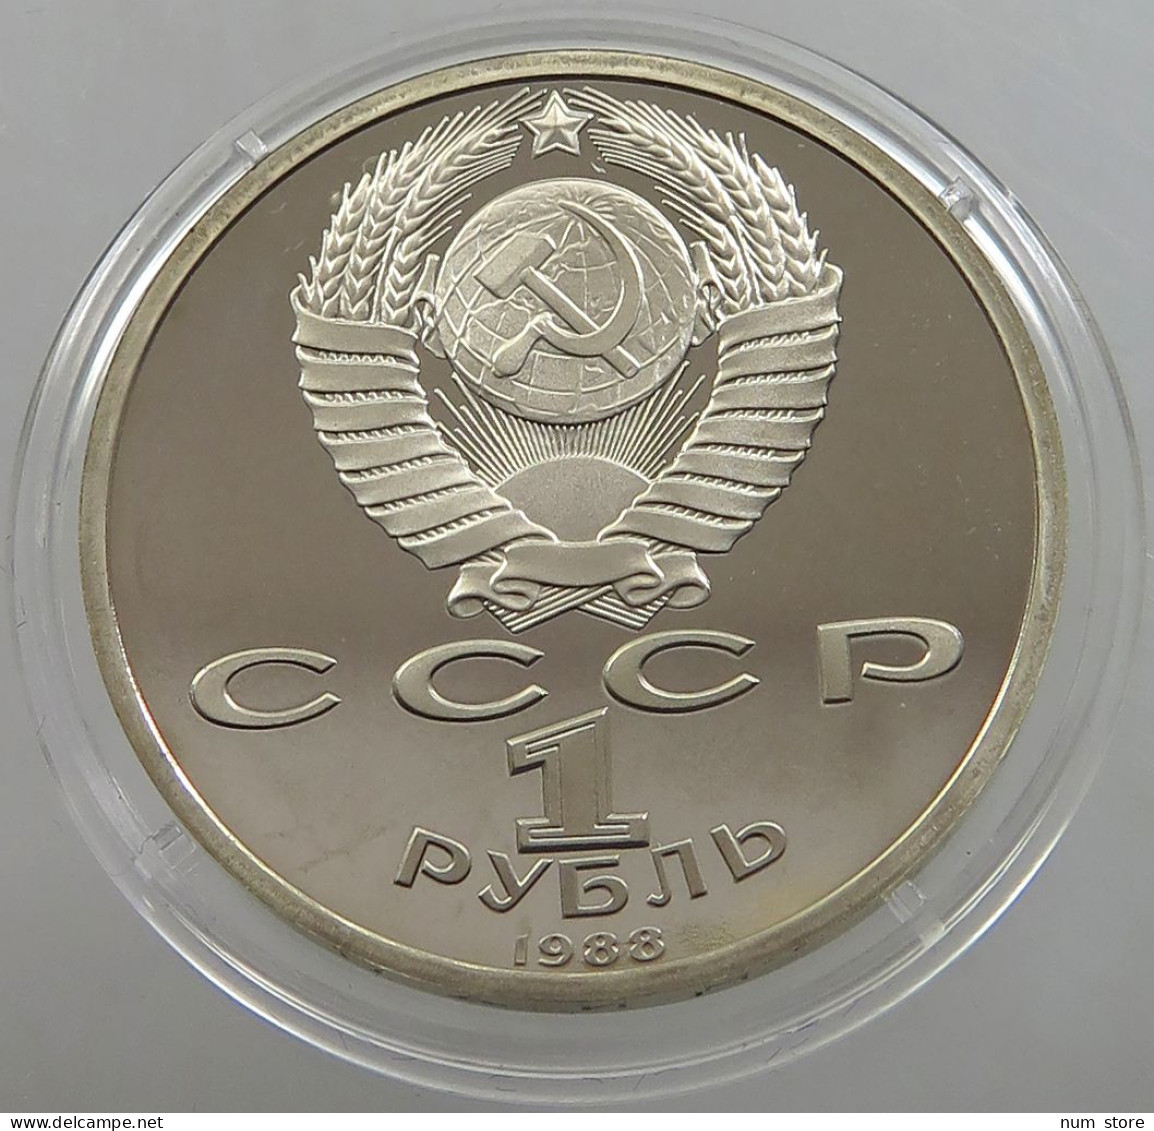 RUSSIA USSR 1 ROUBLE 1988 GORKI PROOF #sm14 0539 - Russland